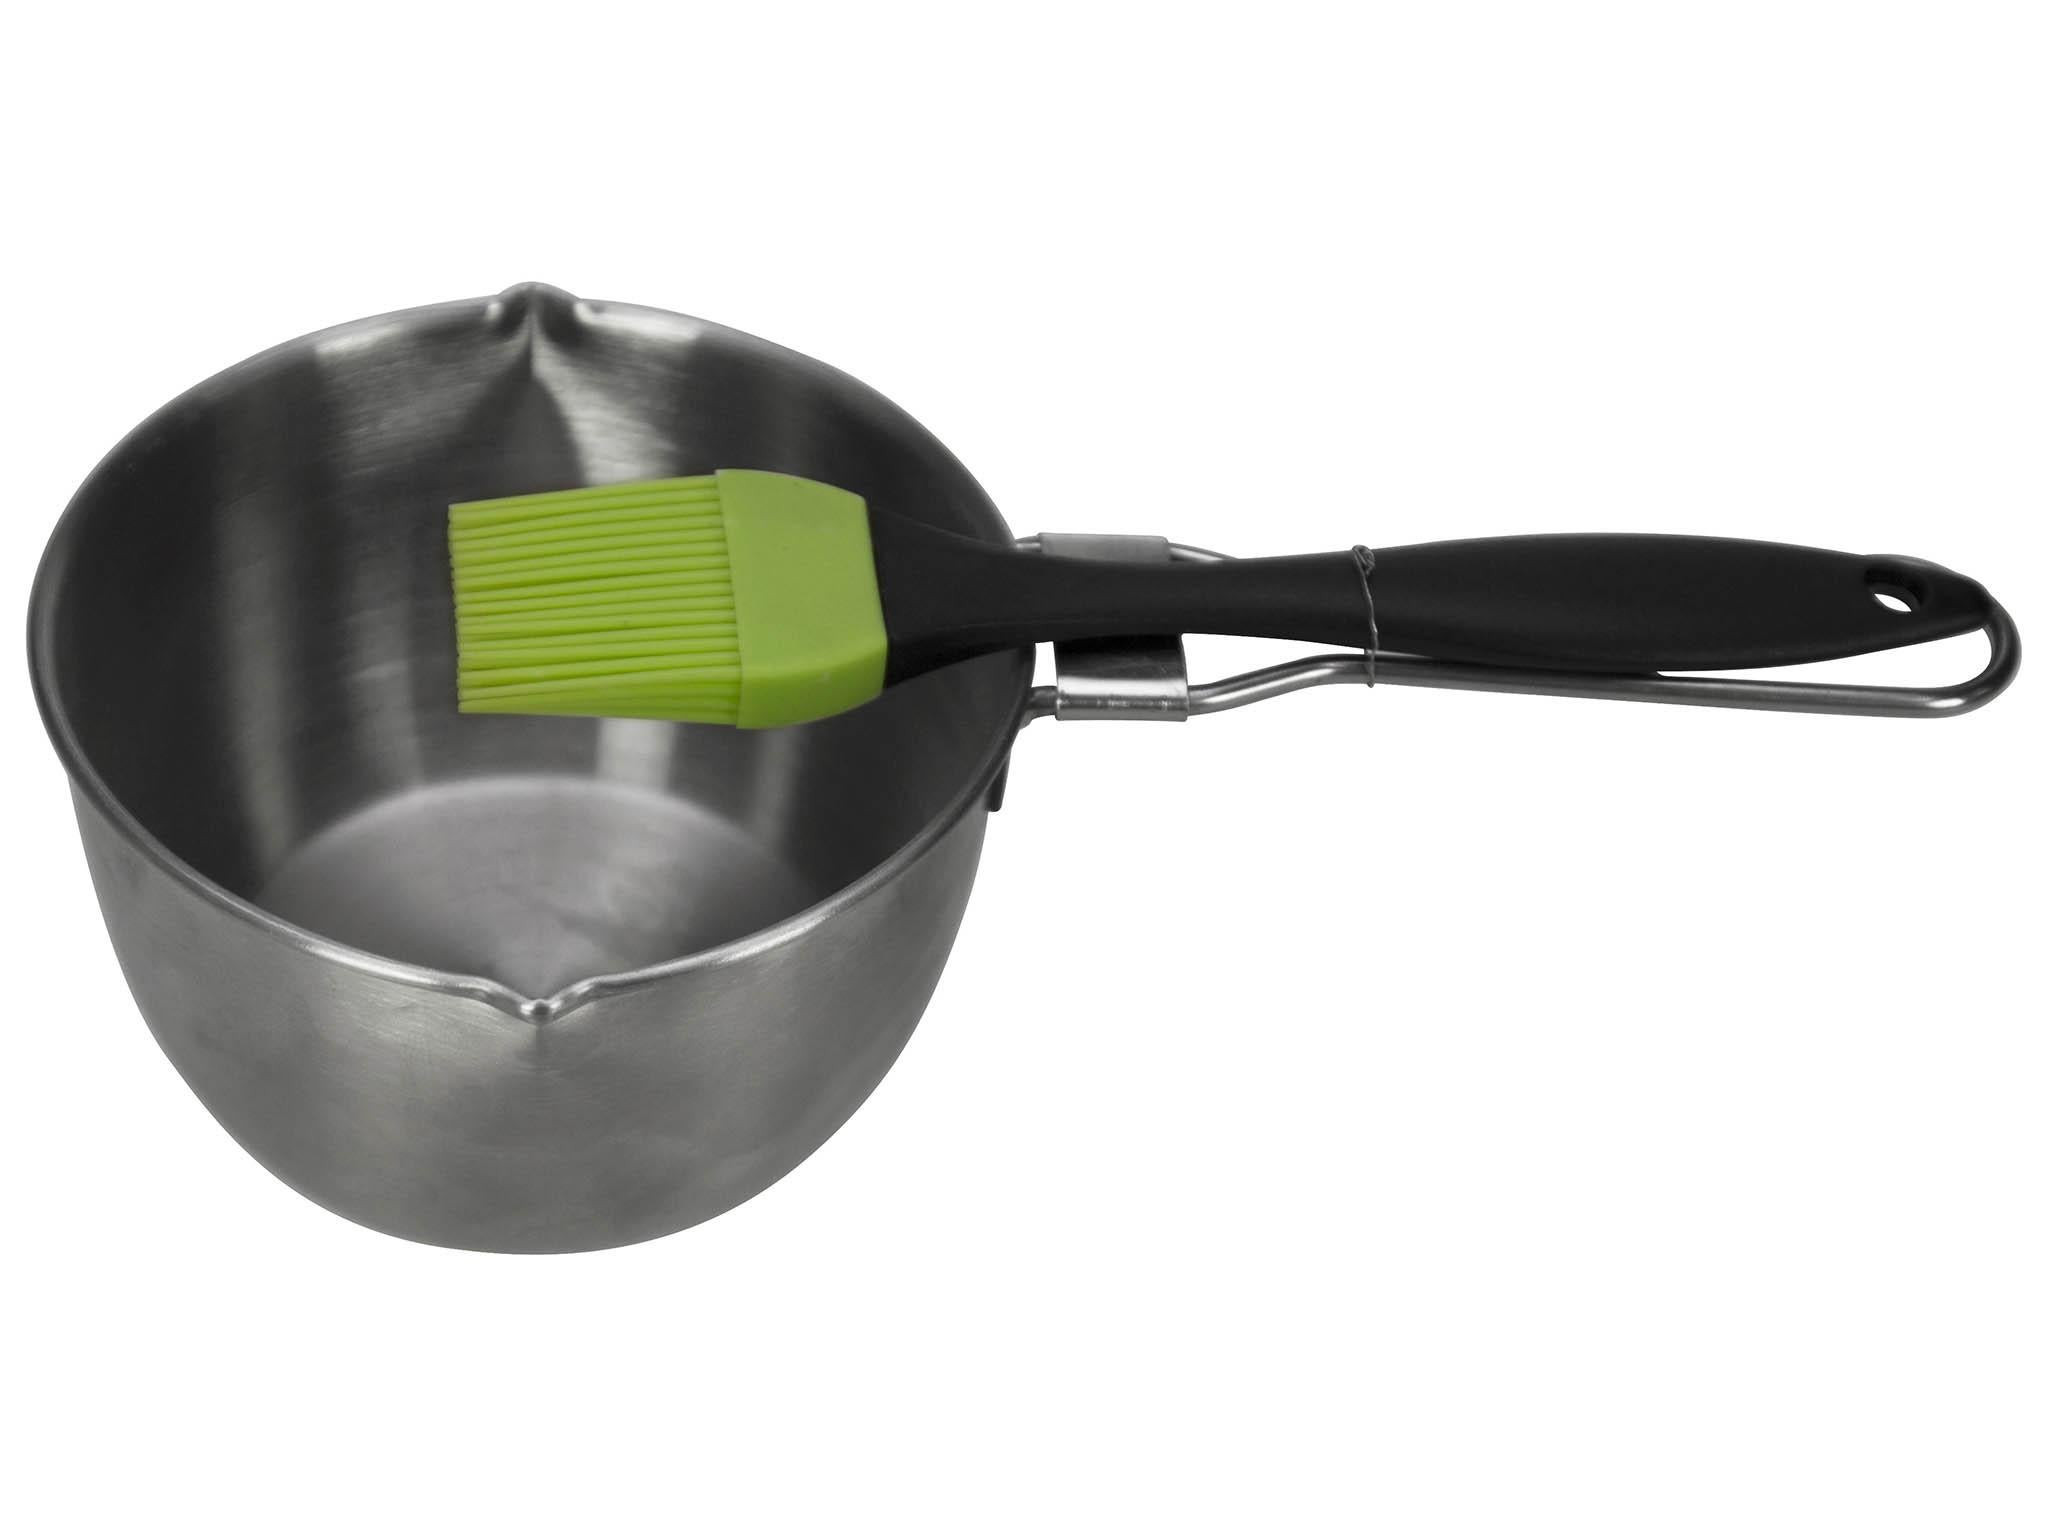 This basting pot and brush has a useful handle to keep the two together